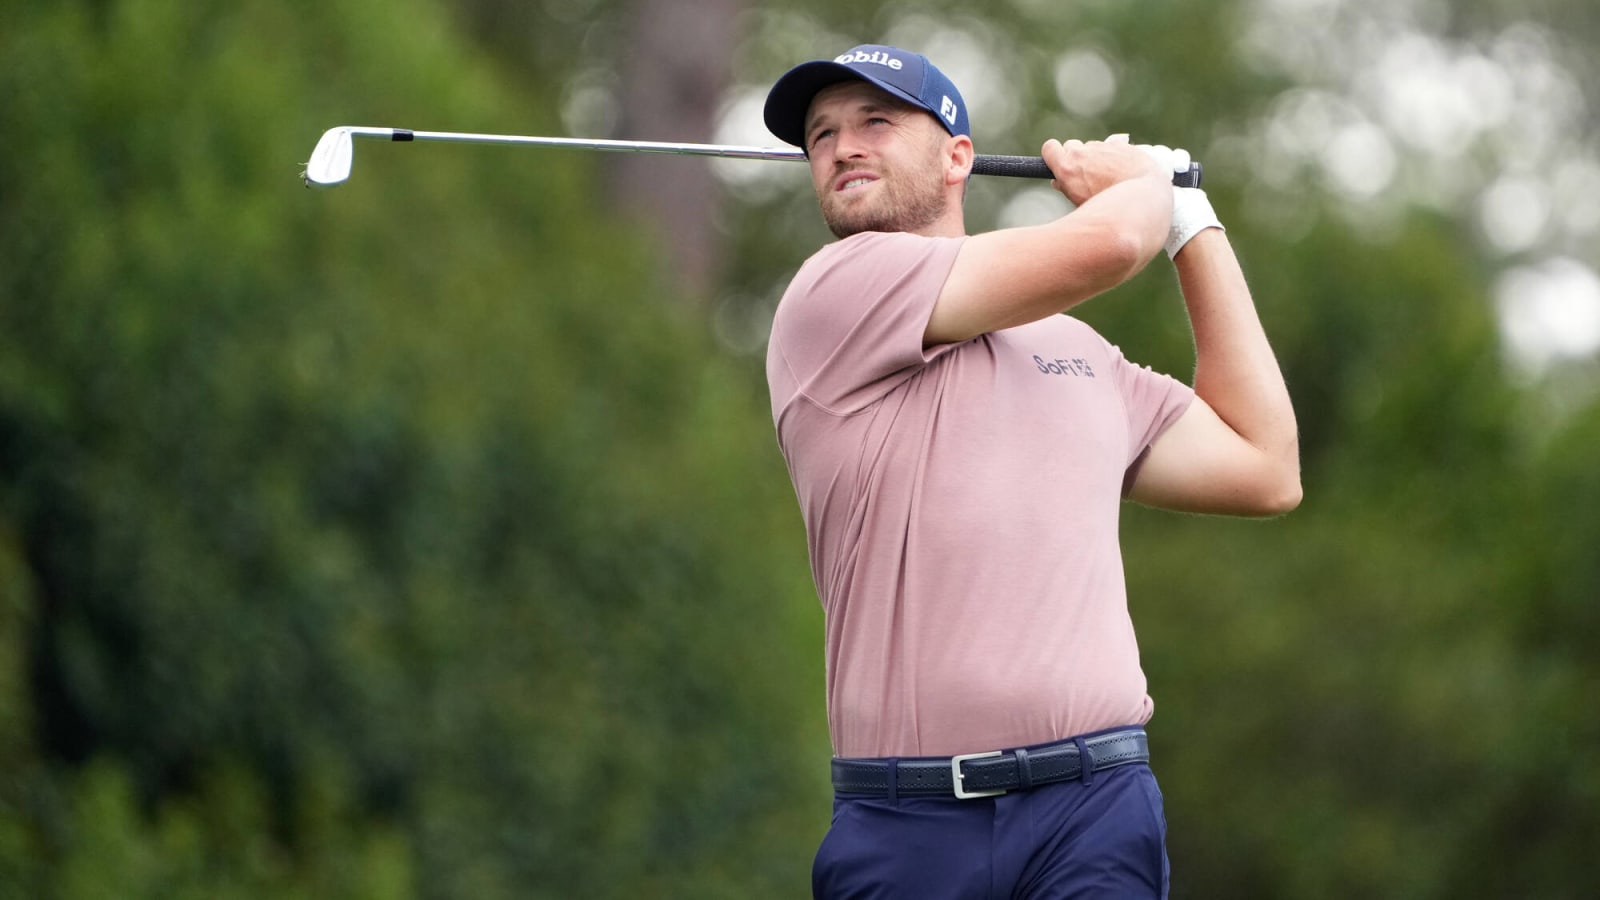 Golf best bets: 3 props for the Wells Fargo Championship